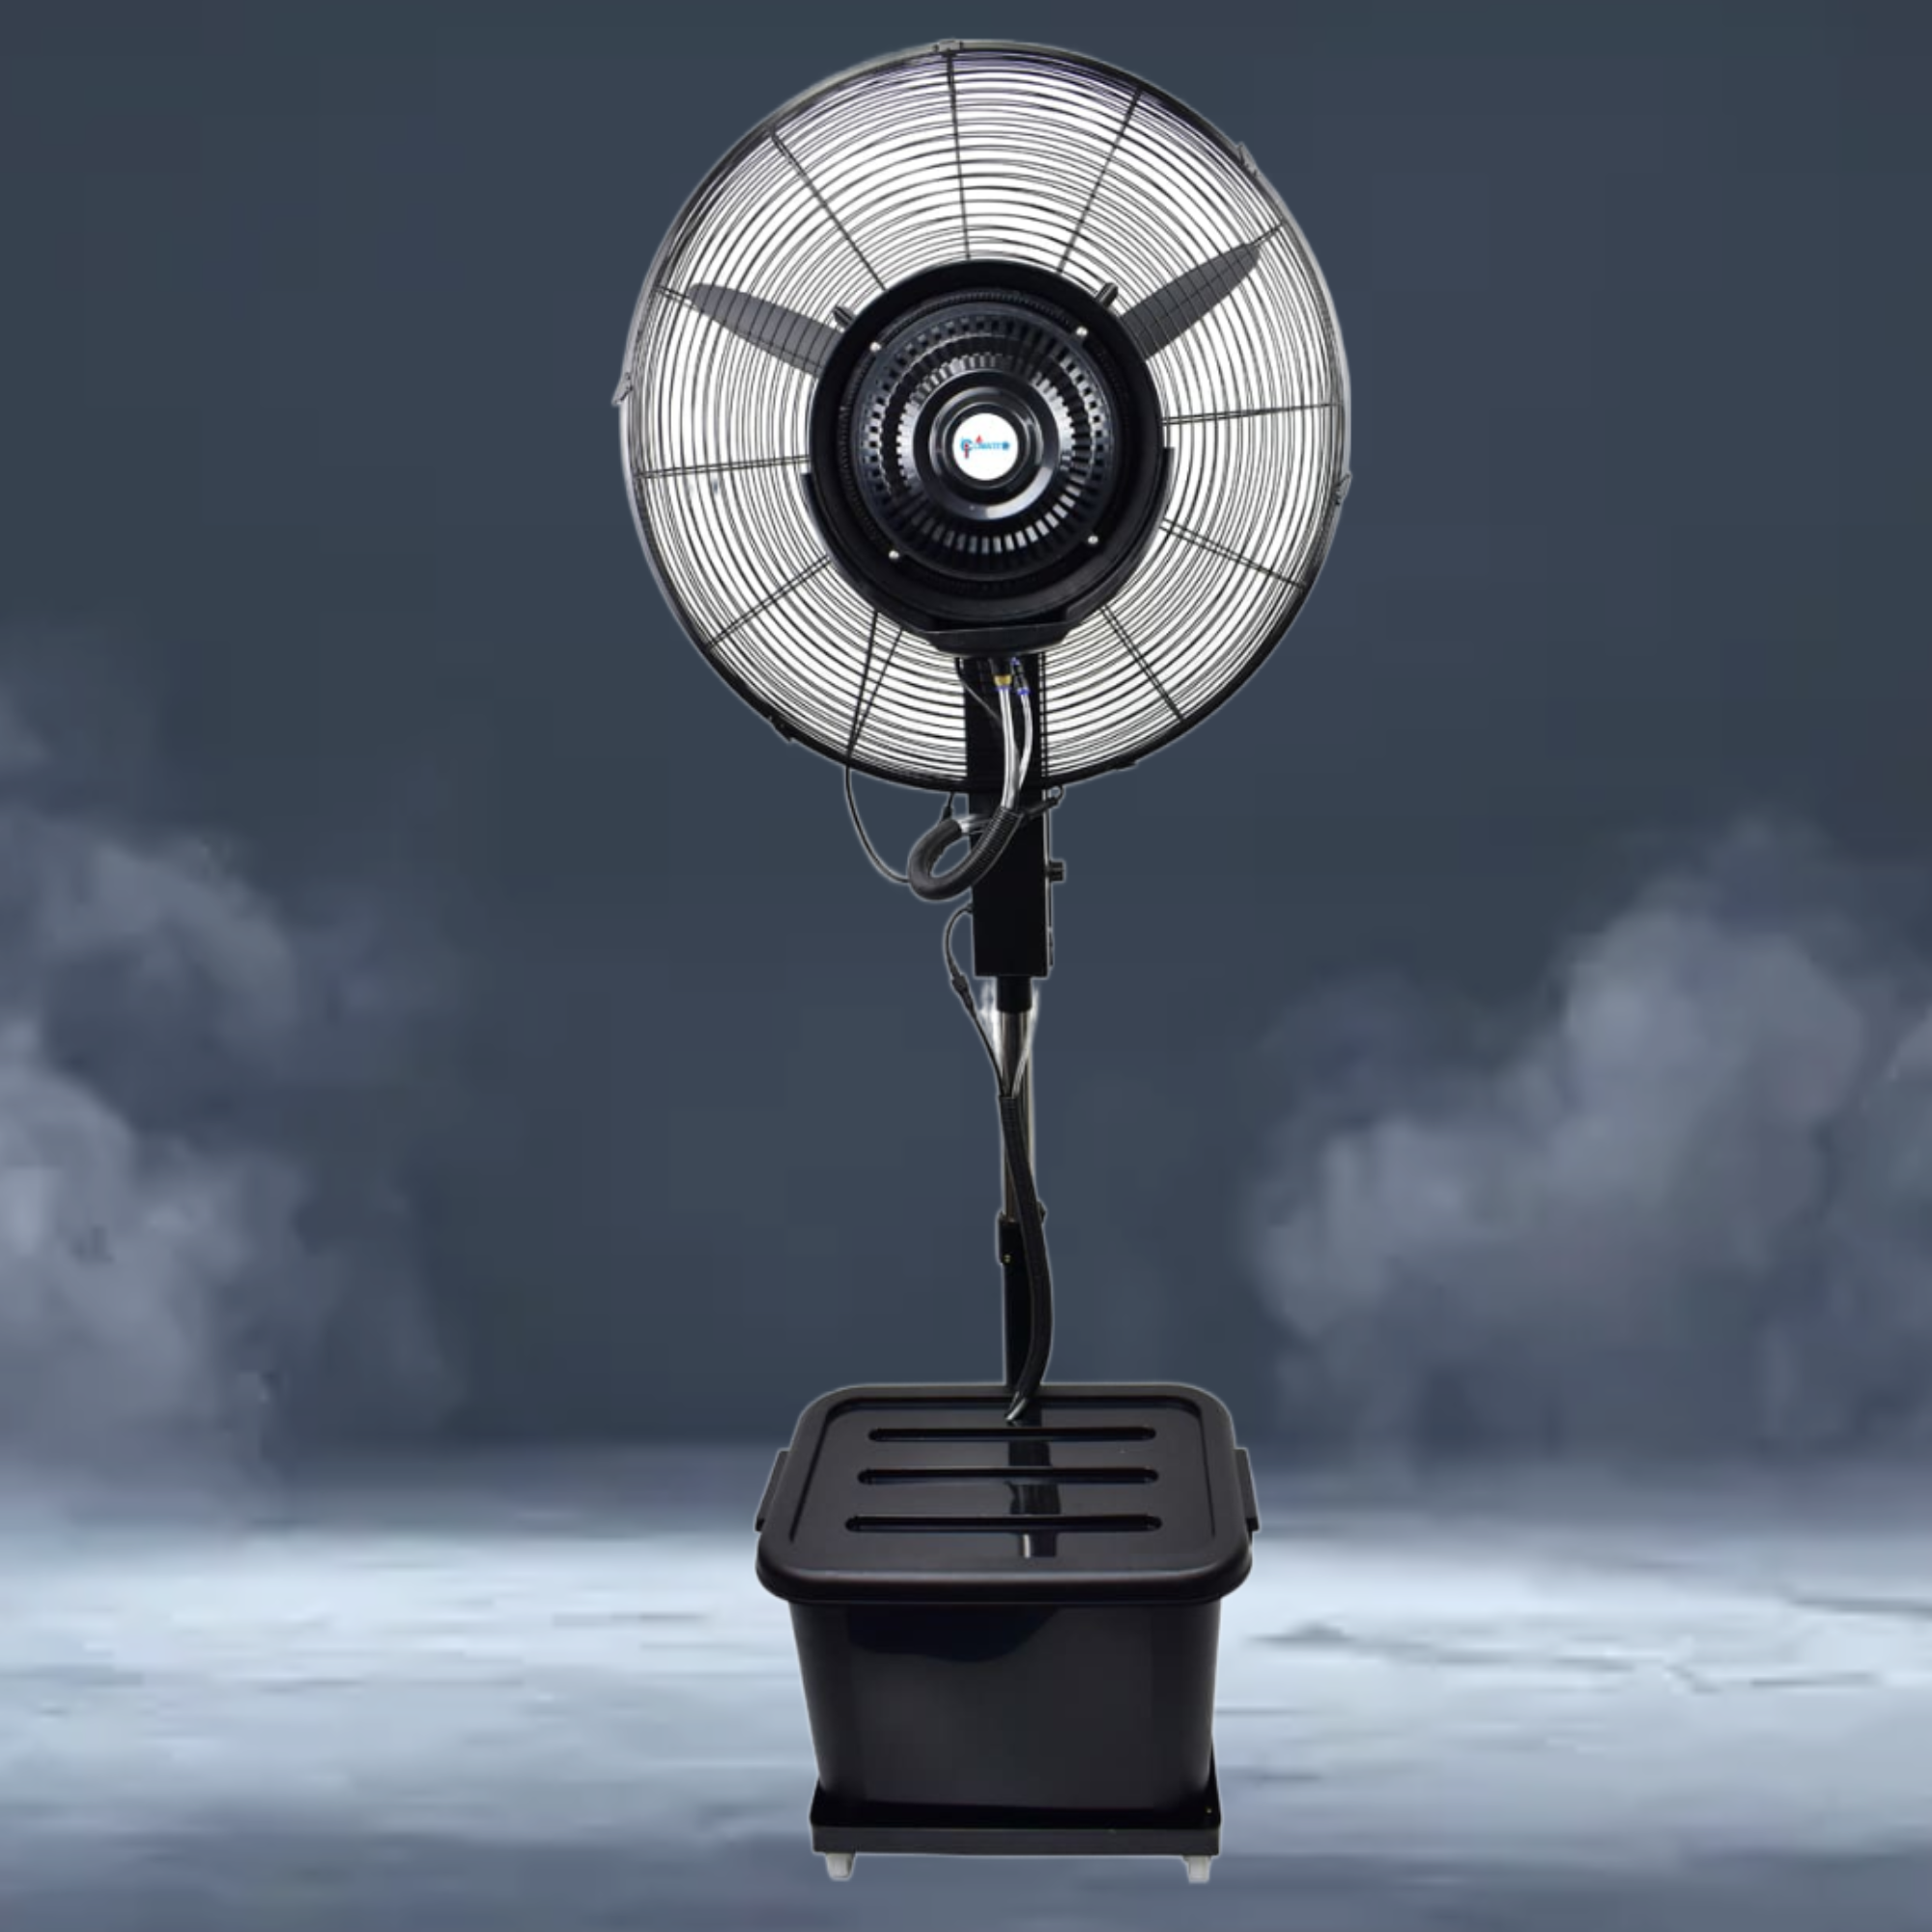 Misting Fans for sales and rentals in all UAE starts at 150 AED